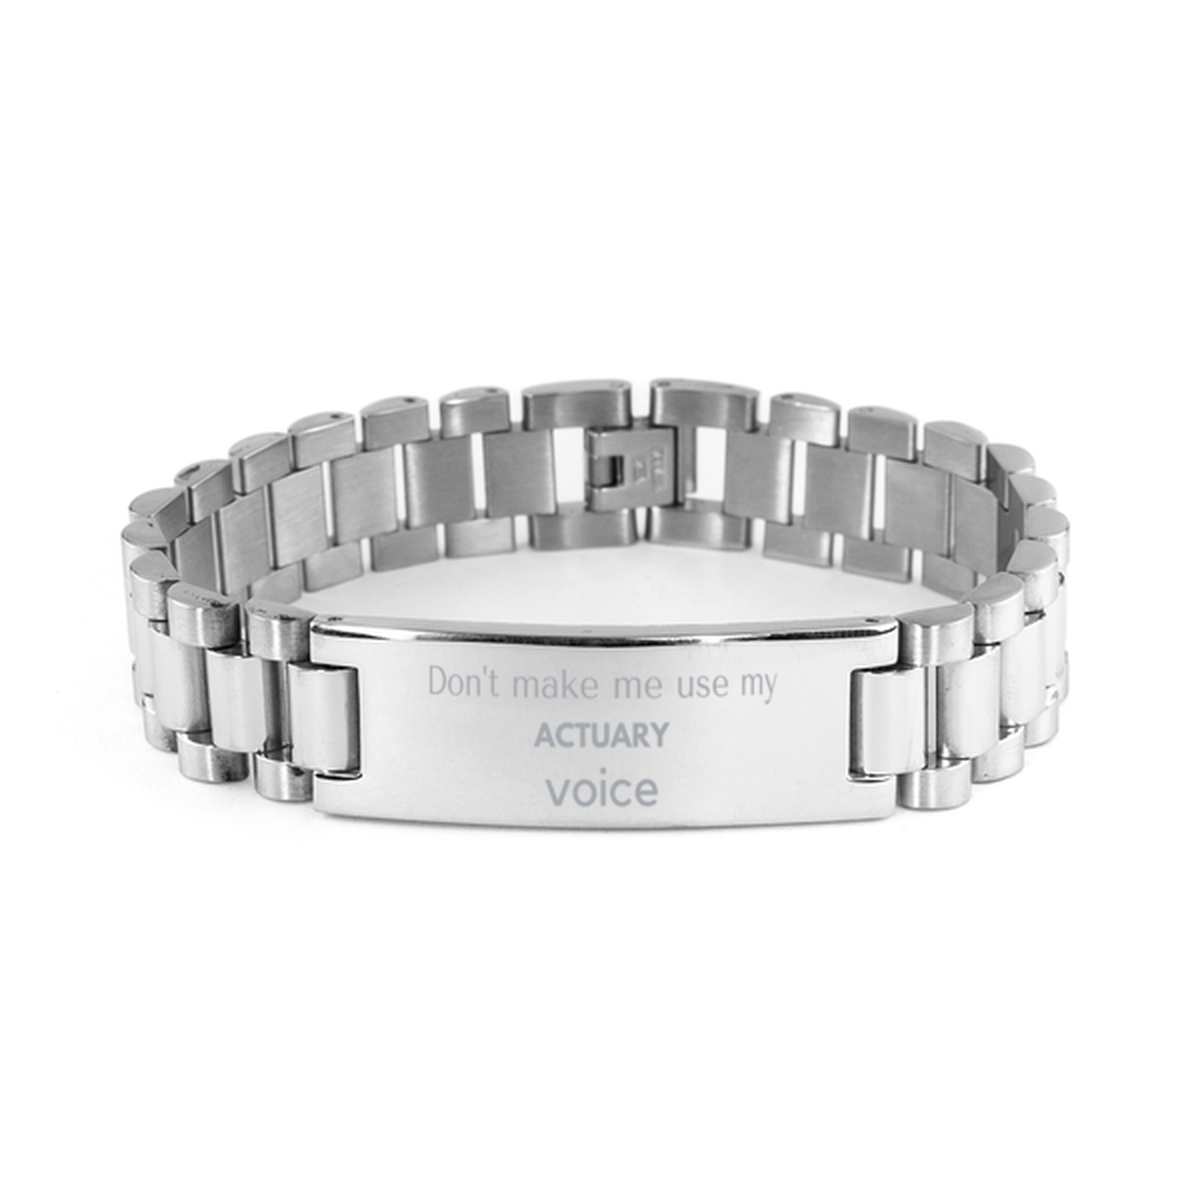 Don't make me use my Actuary voice, Sarcasm Actuary Gifts, Christmas Actuary Ladder Stainless Steel Bracelet Birthday Unique Gifts For Actuary Coworkers, Men, Women, Colleague, Friends